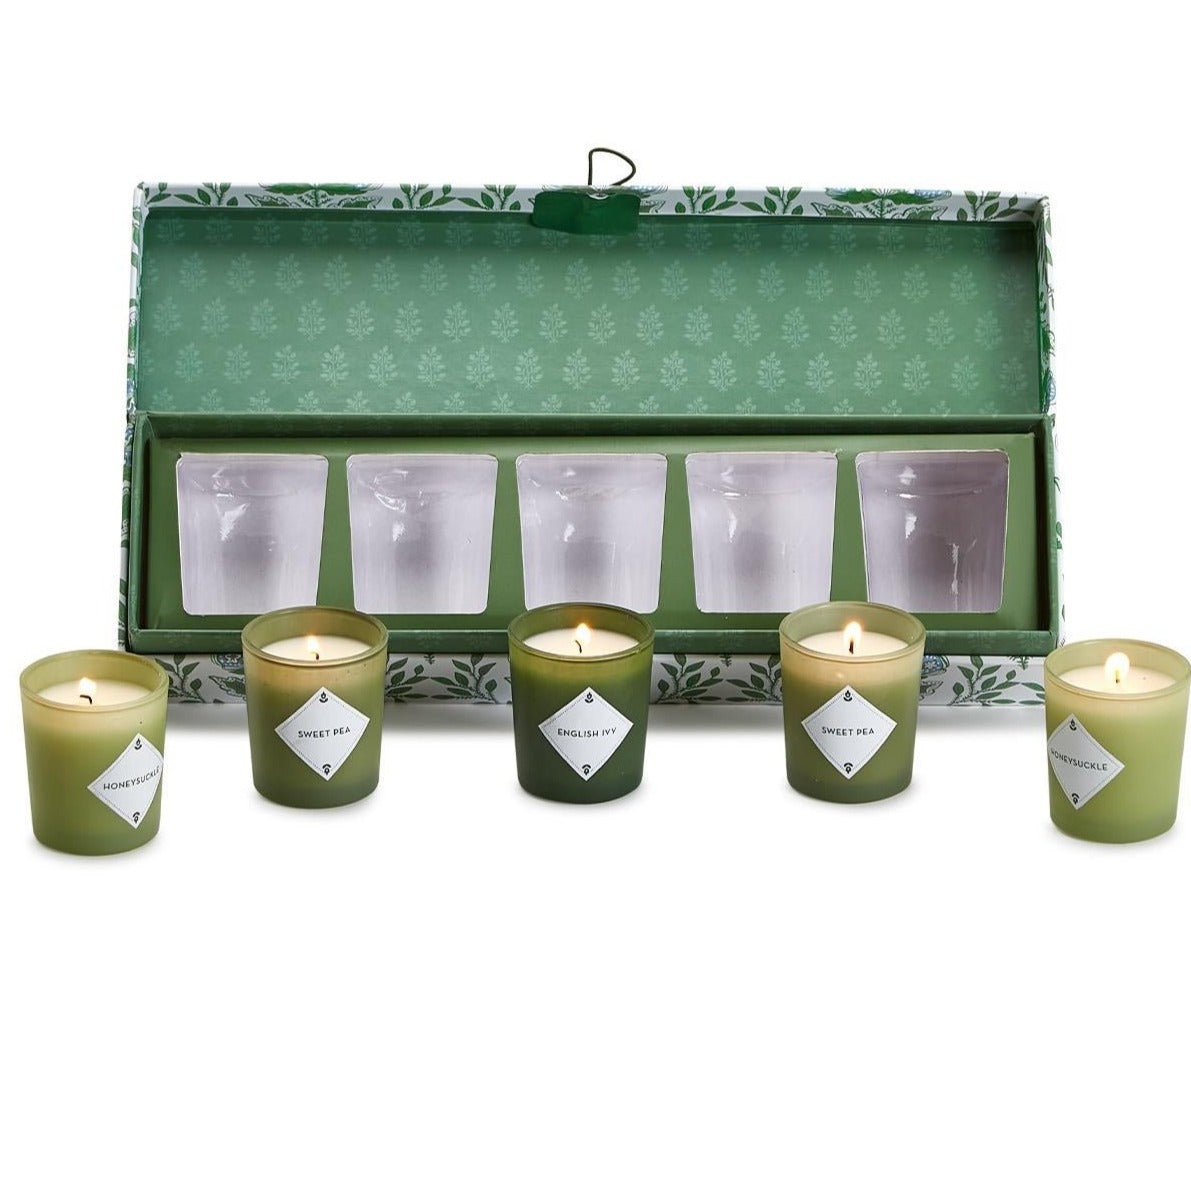 Scented Soy Wax Candles: Countryside S/5